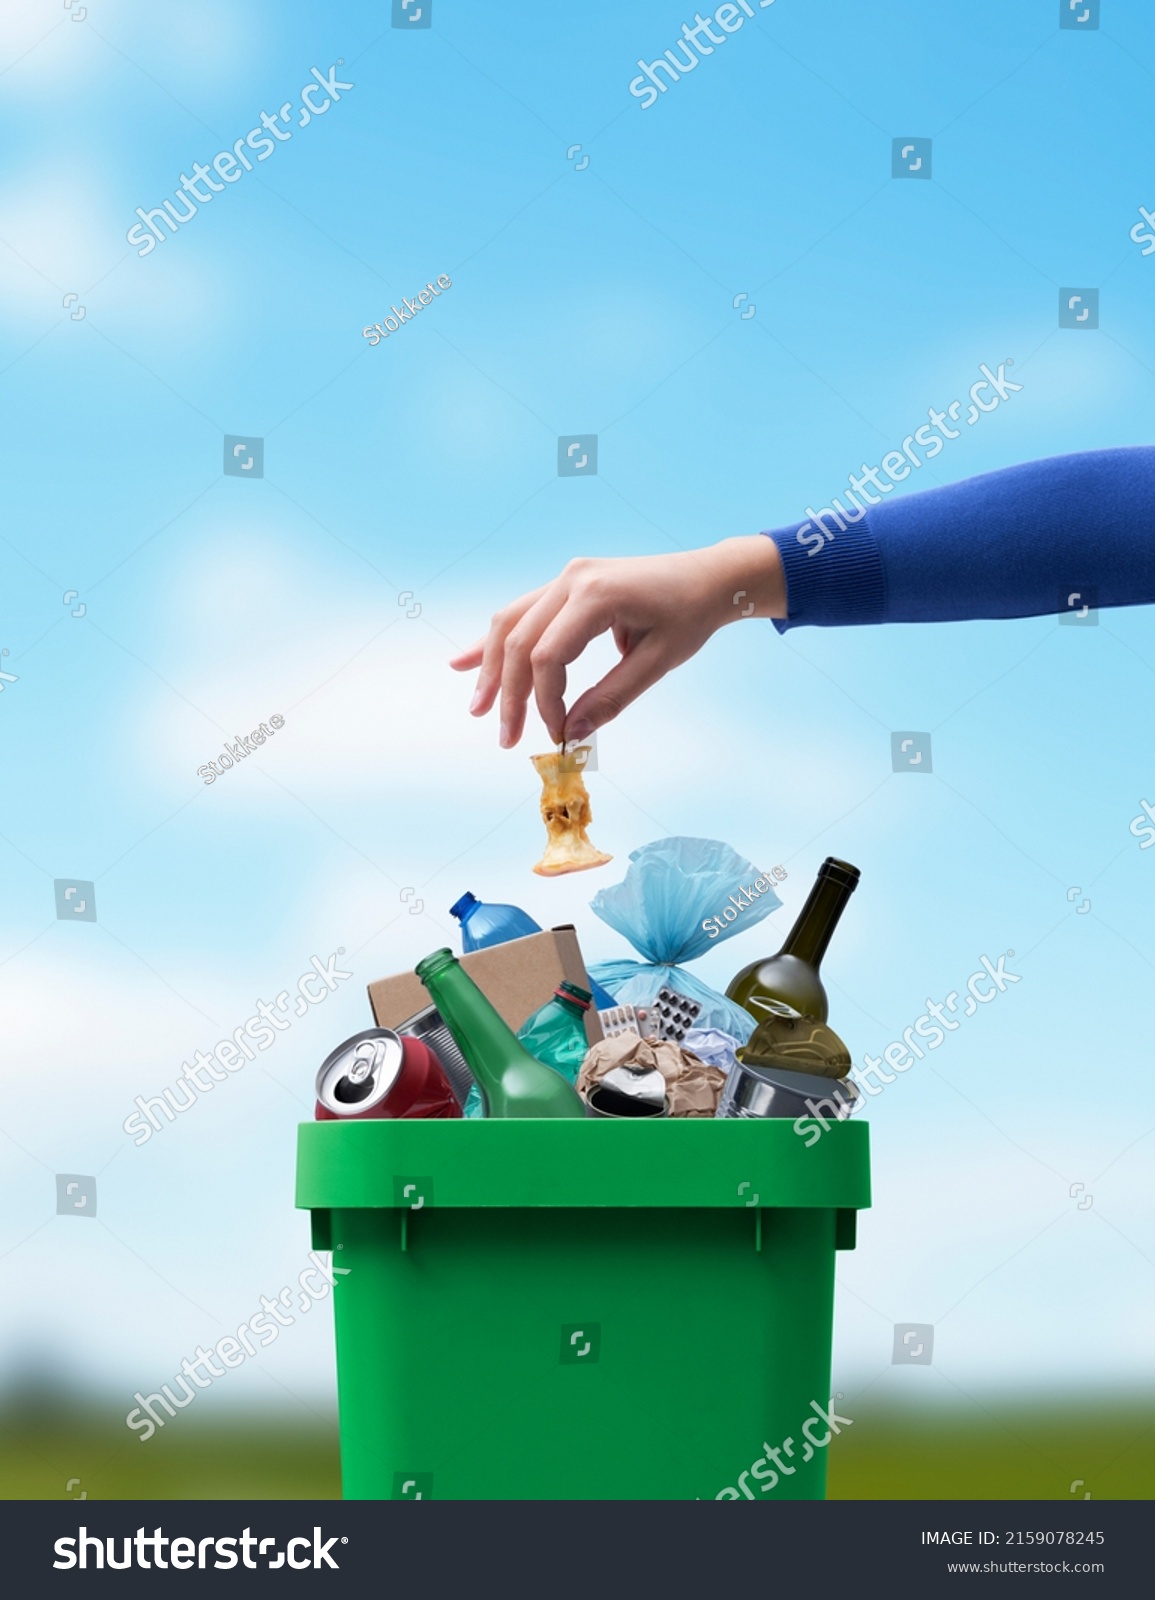 Woman putting food leftovers in a undifferentiated waste bin, improper waste management concept #2159078245